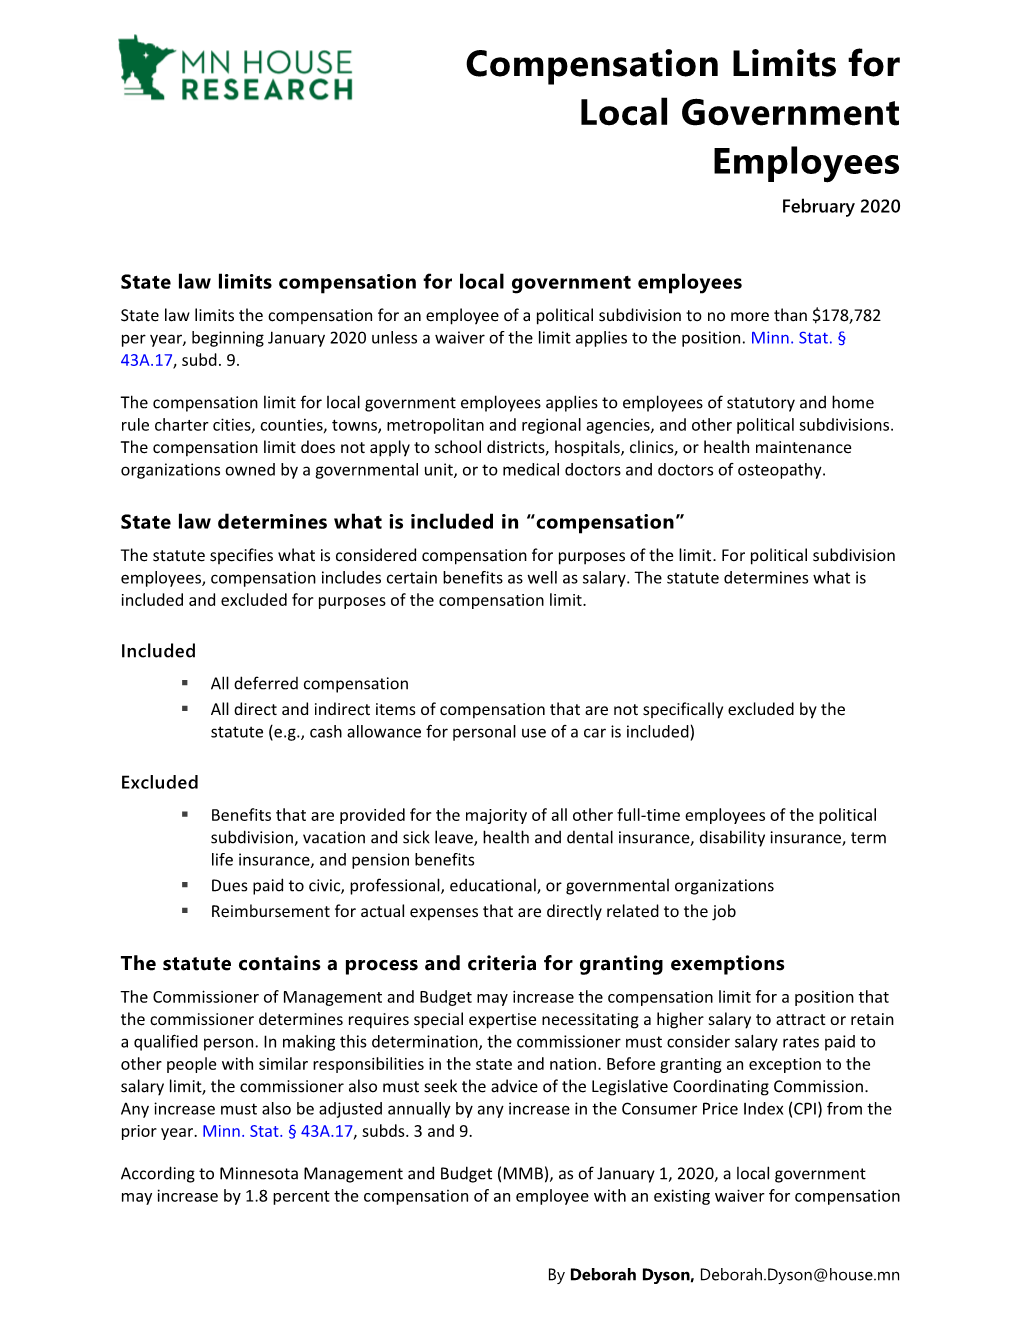 Compensation Limits for Local Government Employees February 2020